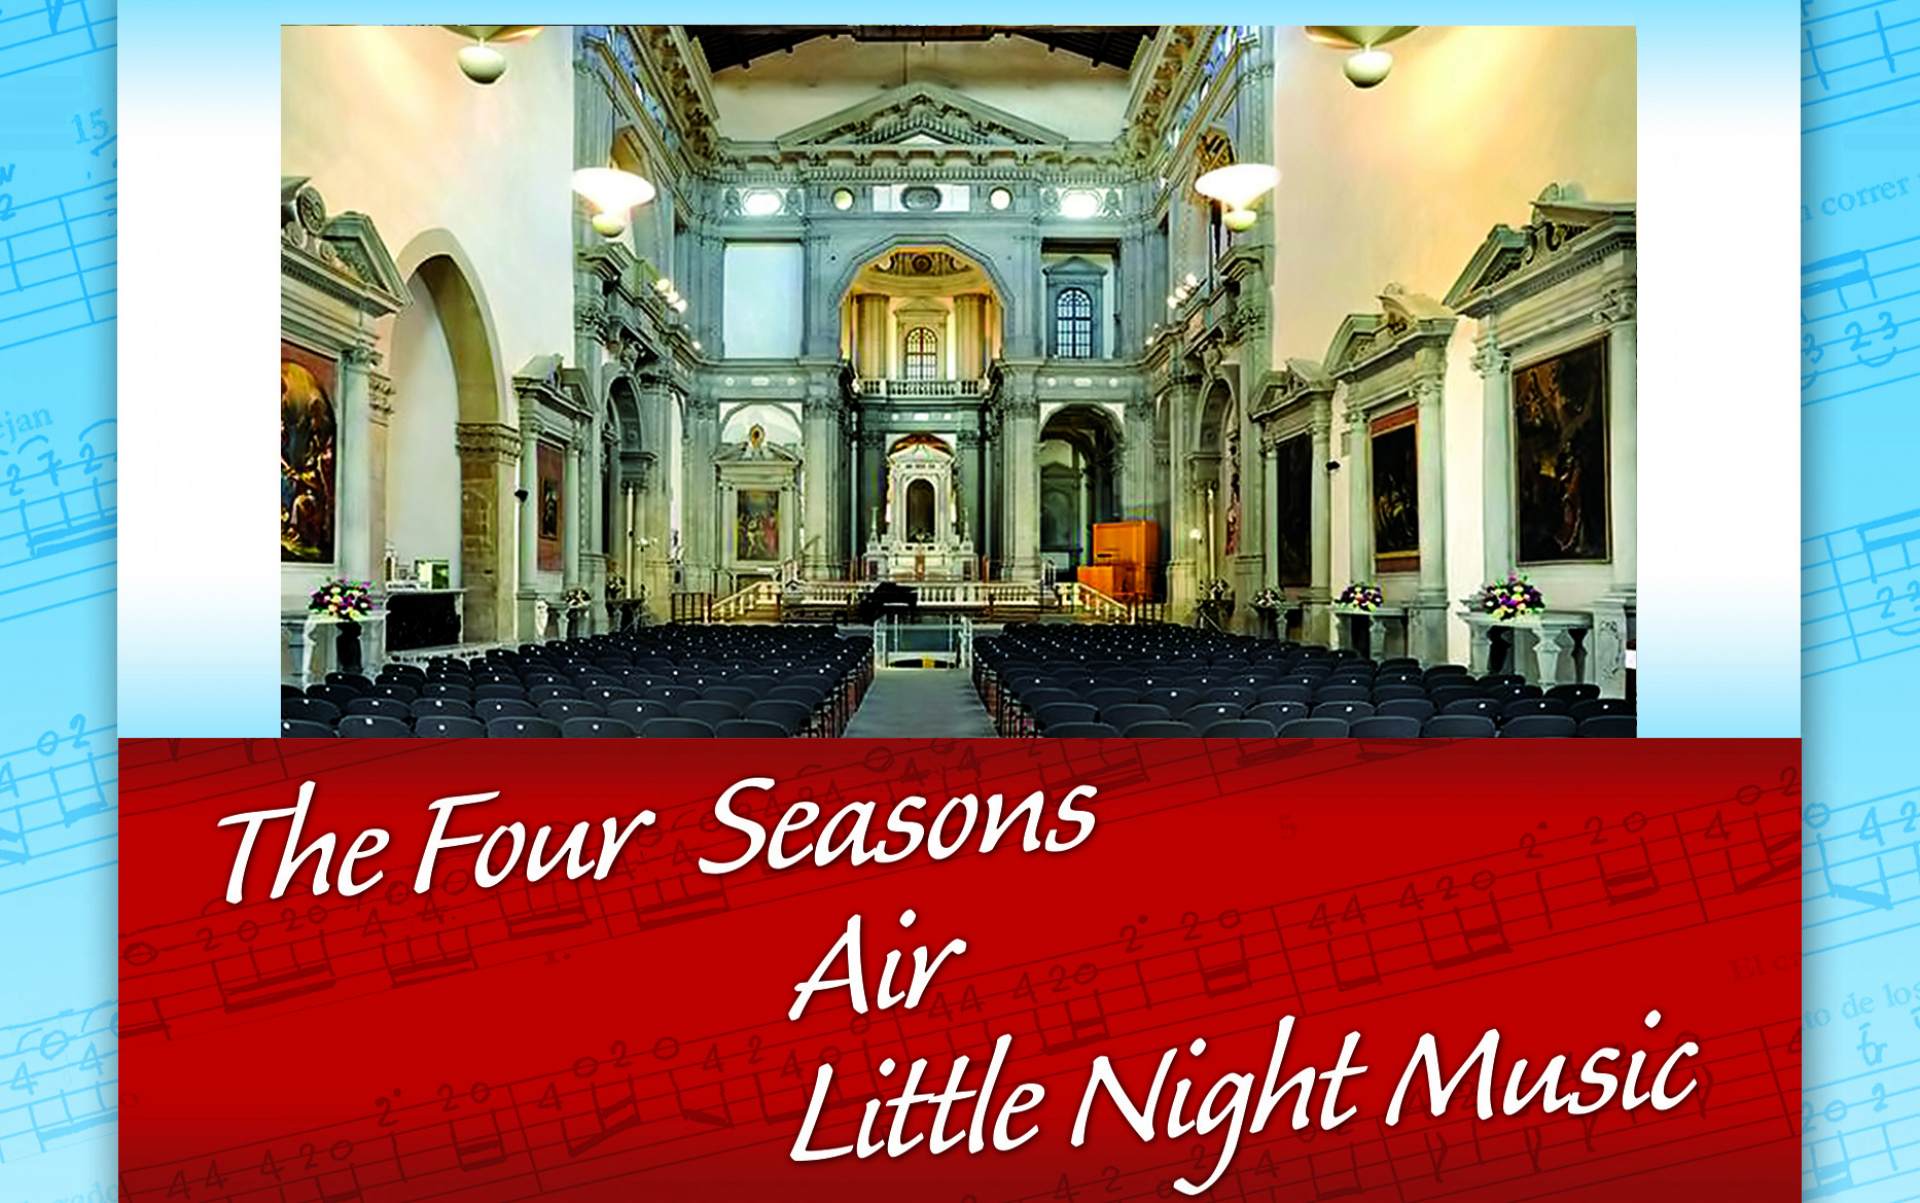 The Four Seasons, Air and Little Night Music